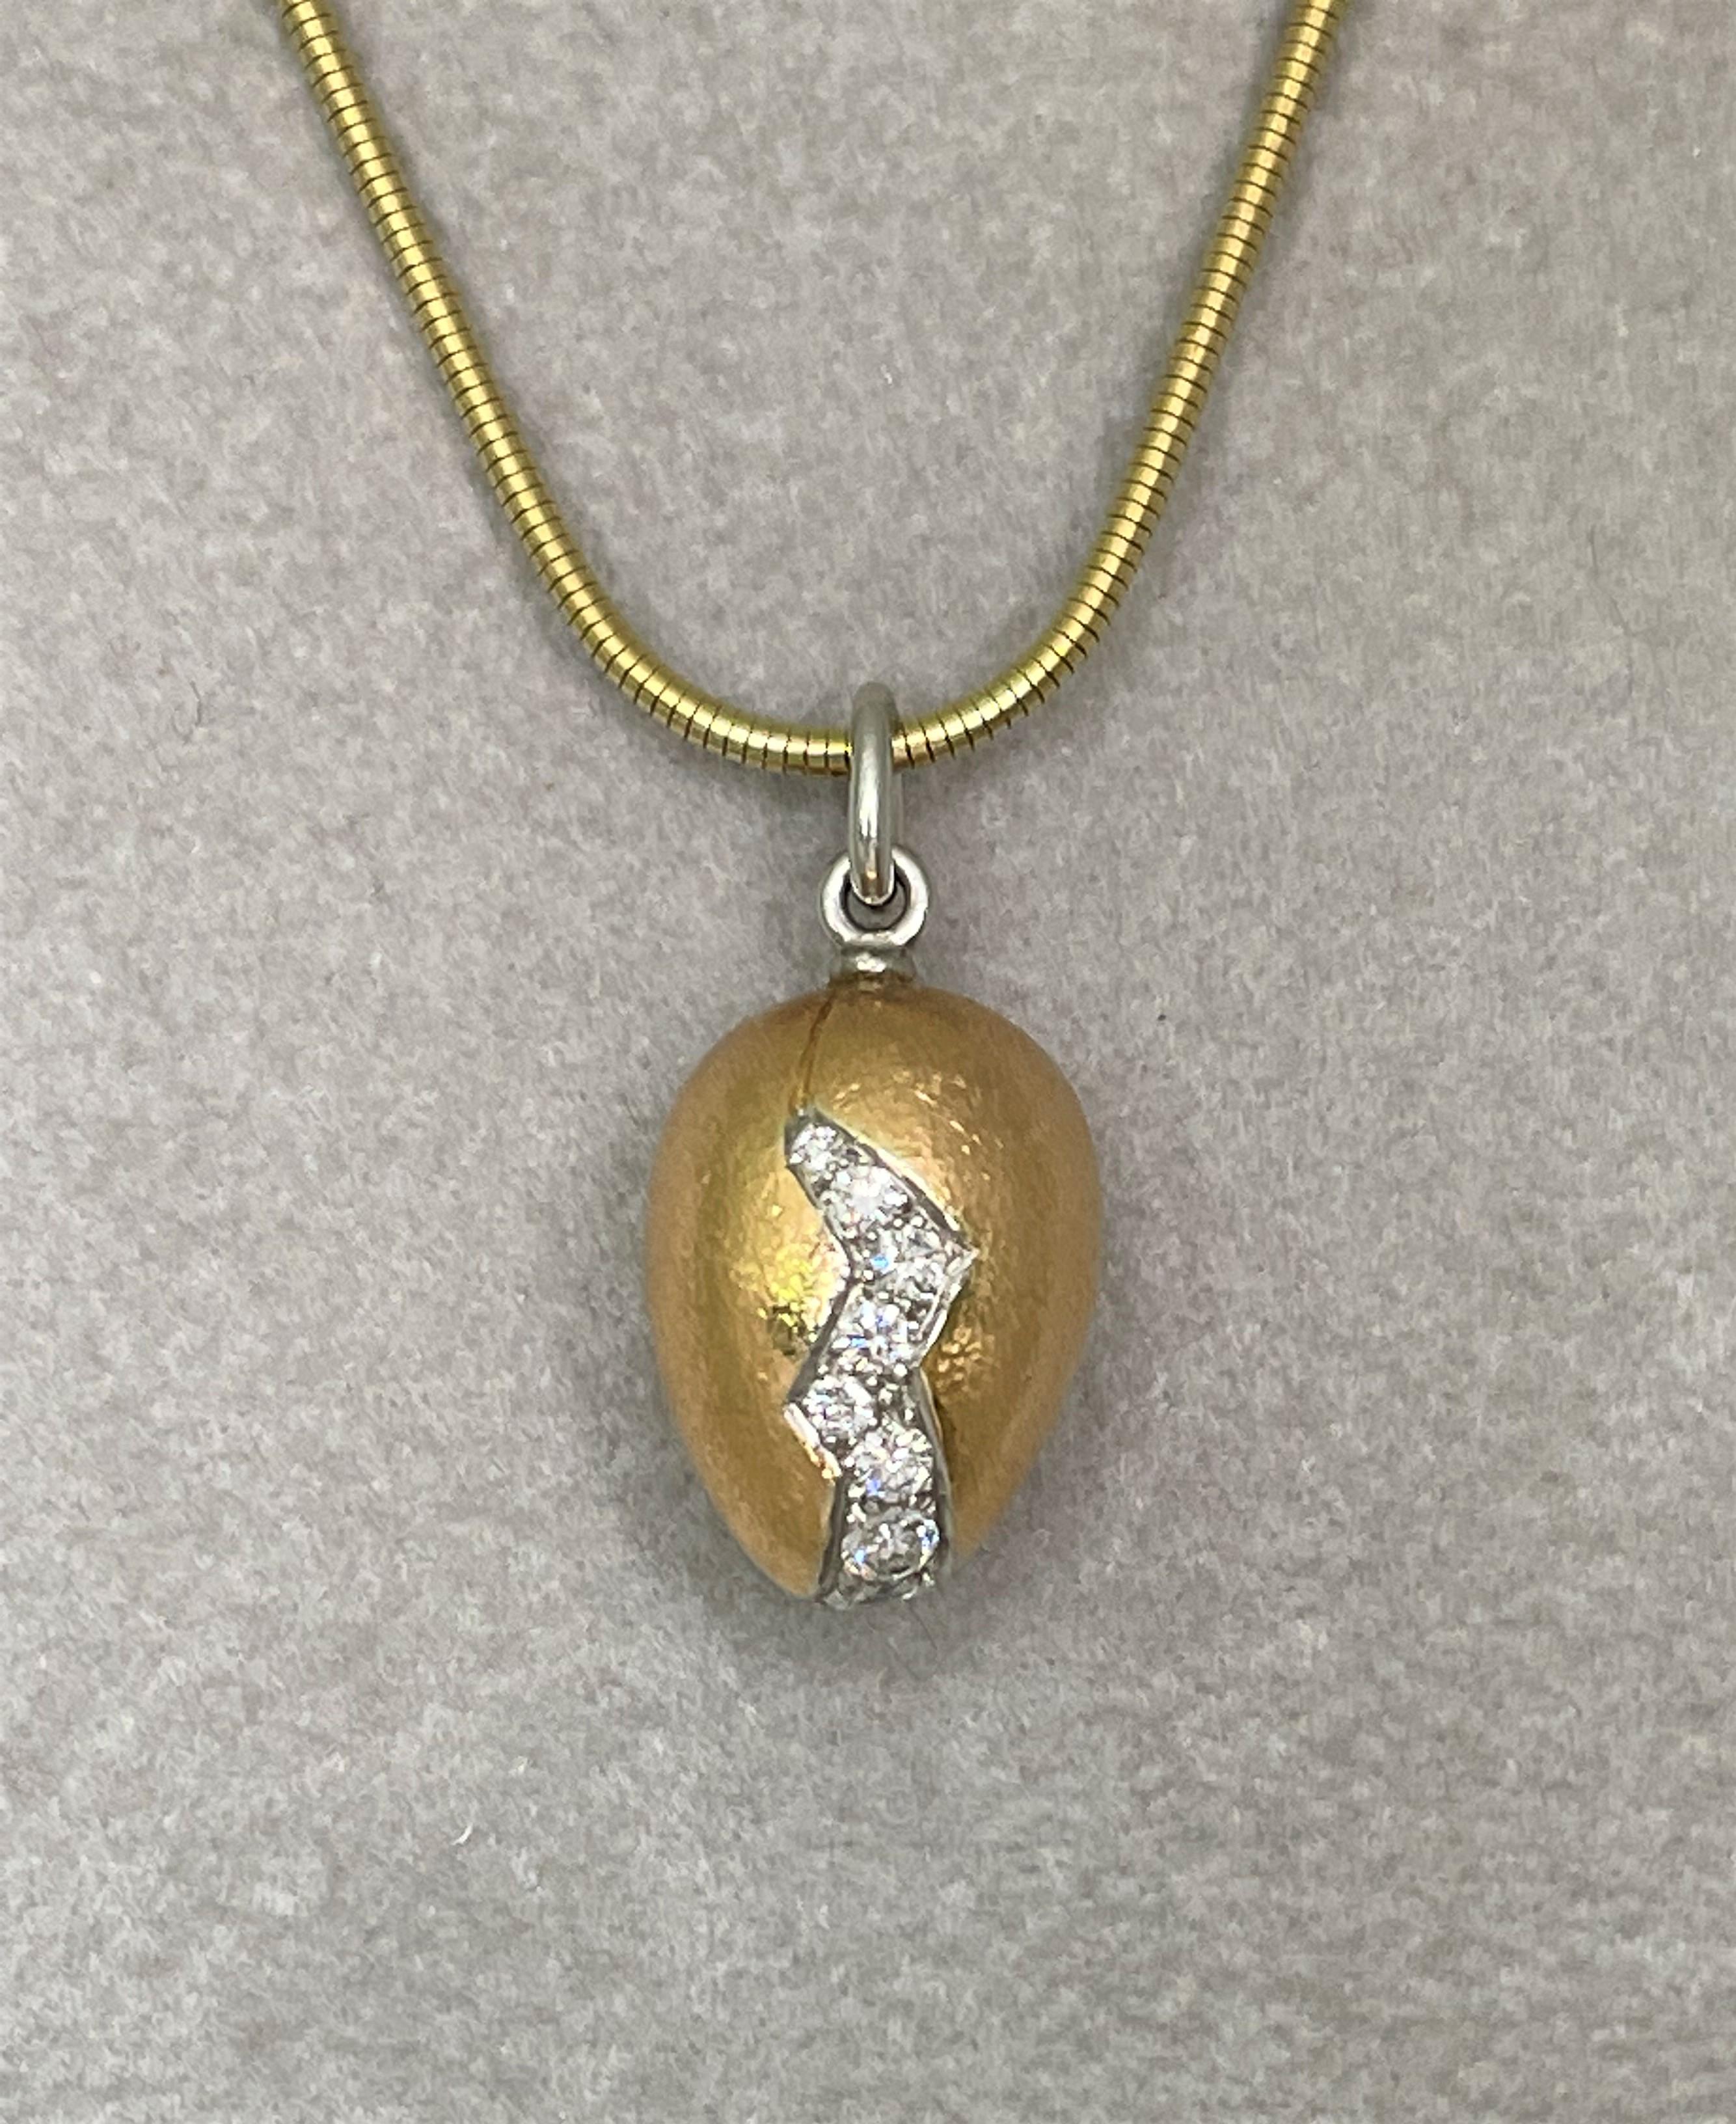 By designer Pedro Boregaard in New York, this pendant is egg-ceptional!  
18 karat yellow brushed gold egg; approximately 11mm wide and 21mm long.
Designed 